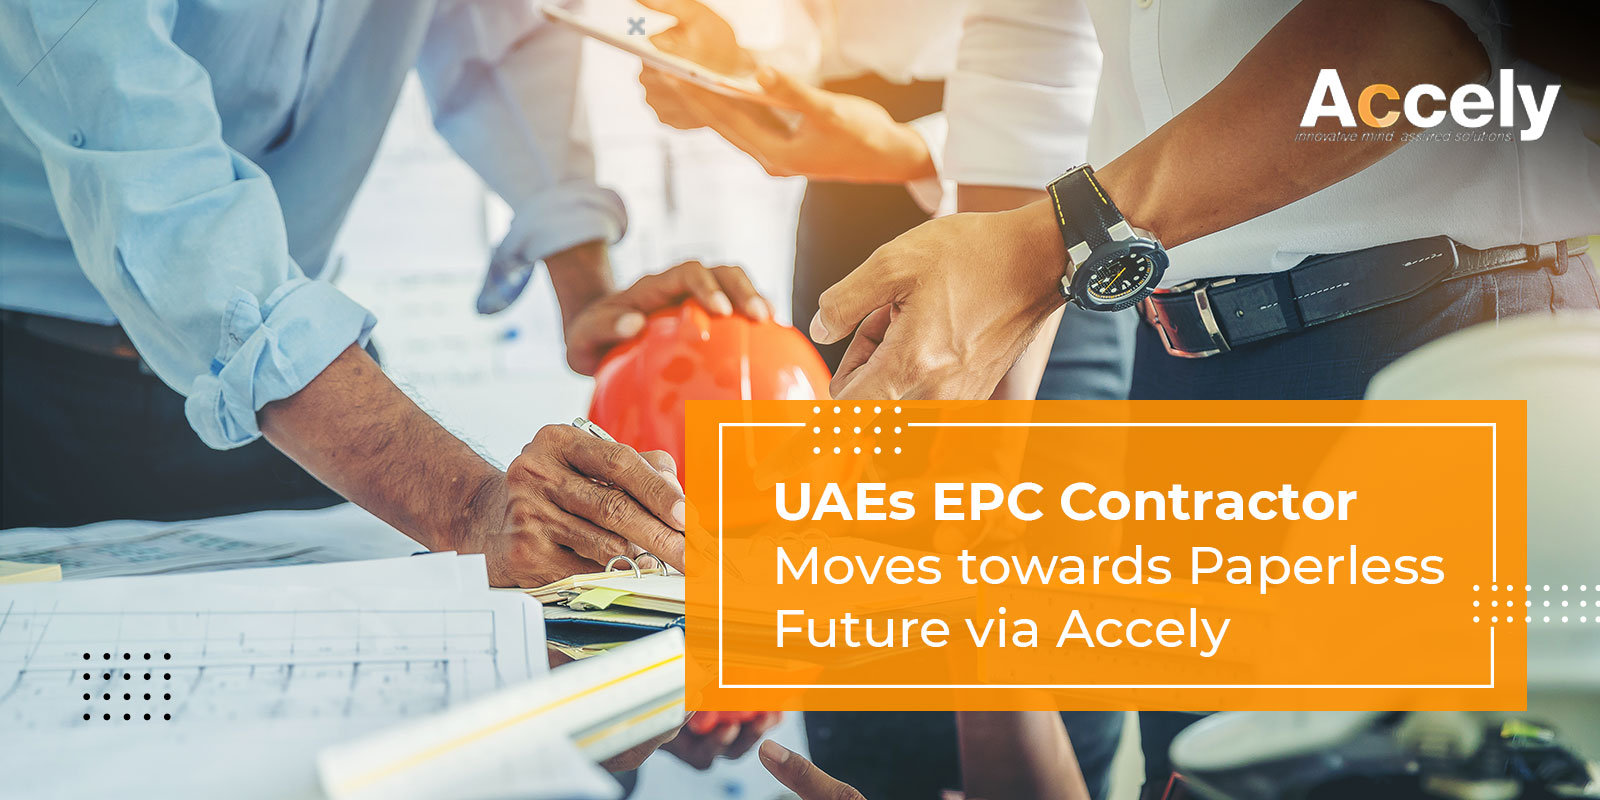 UAEs EPC Contractor Moves towards Paperless Future via Accely